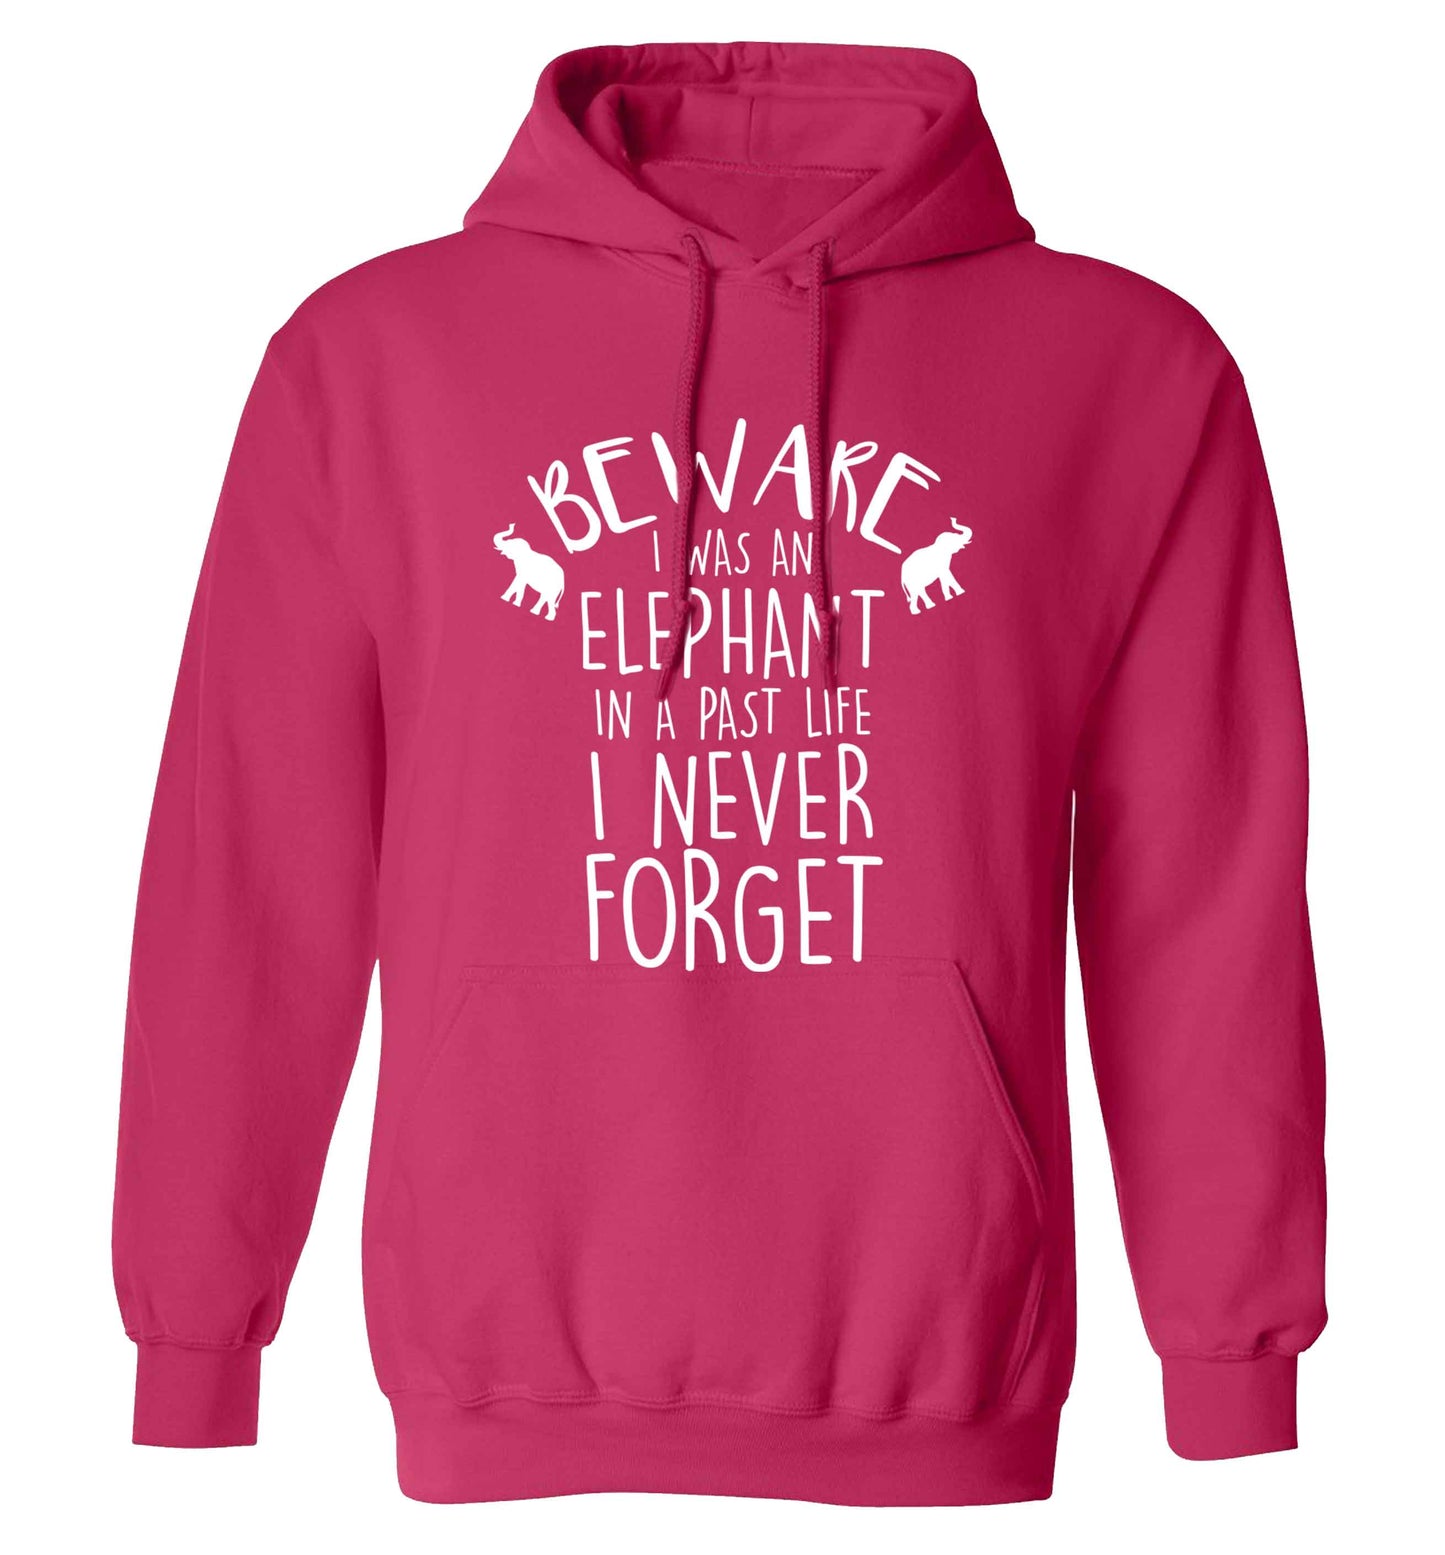 Beware I was an elephant in my past life I never forget adults unisex pink hoodie 2XL